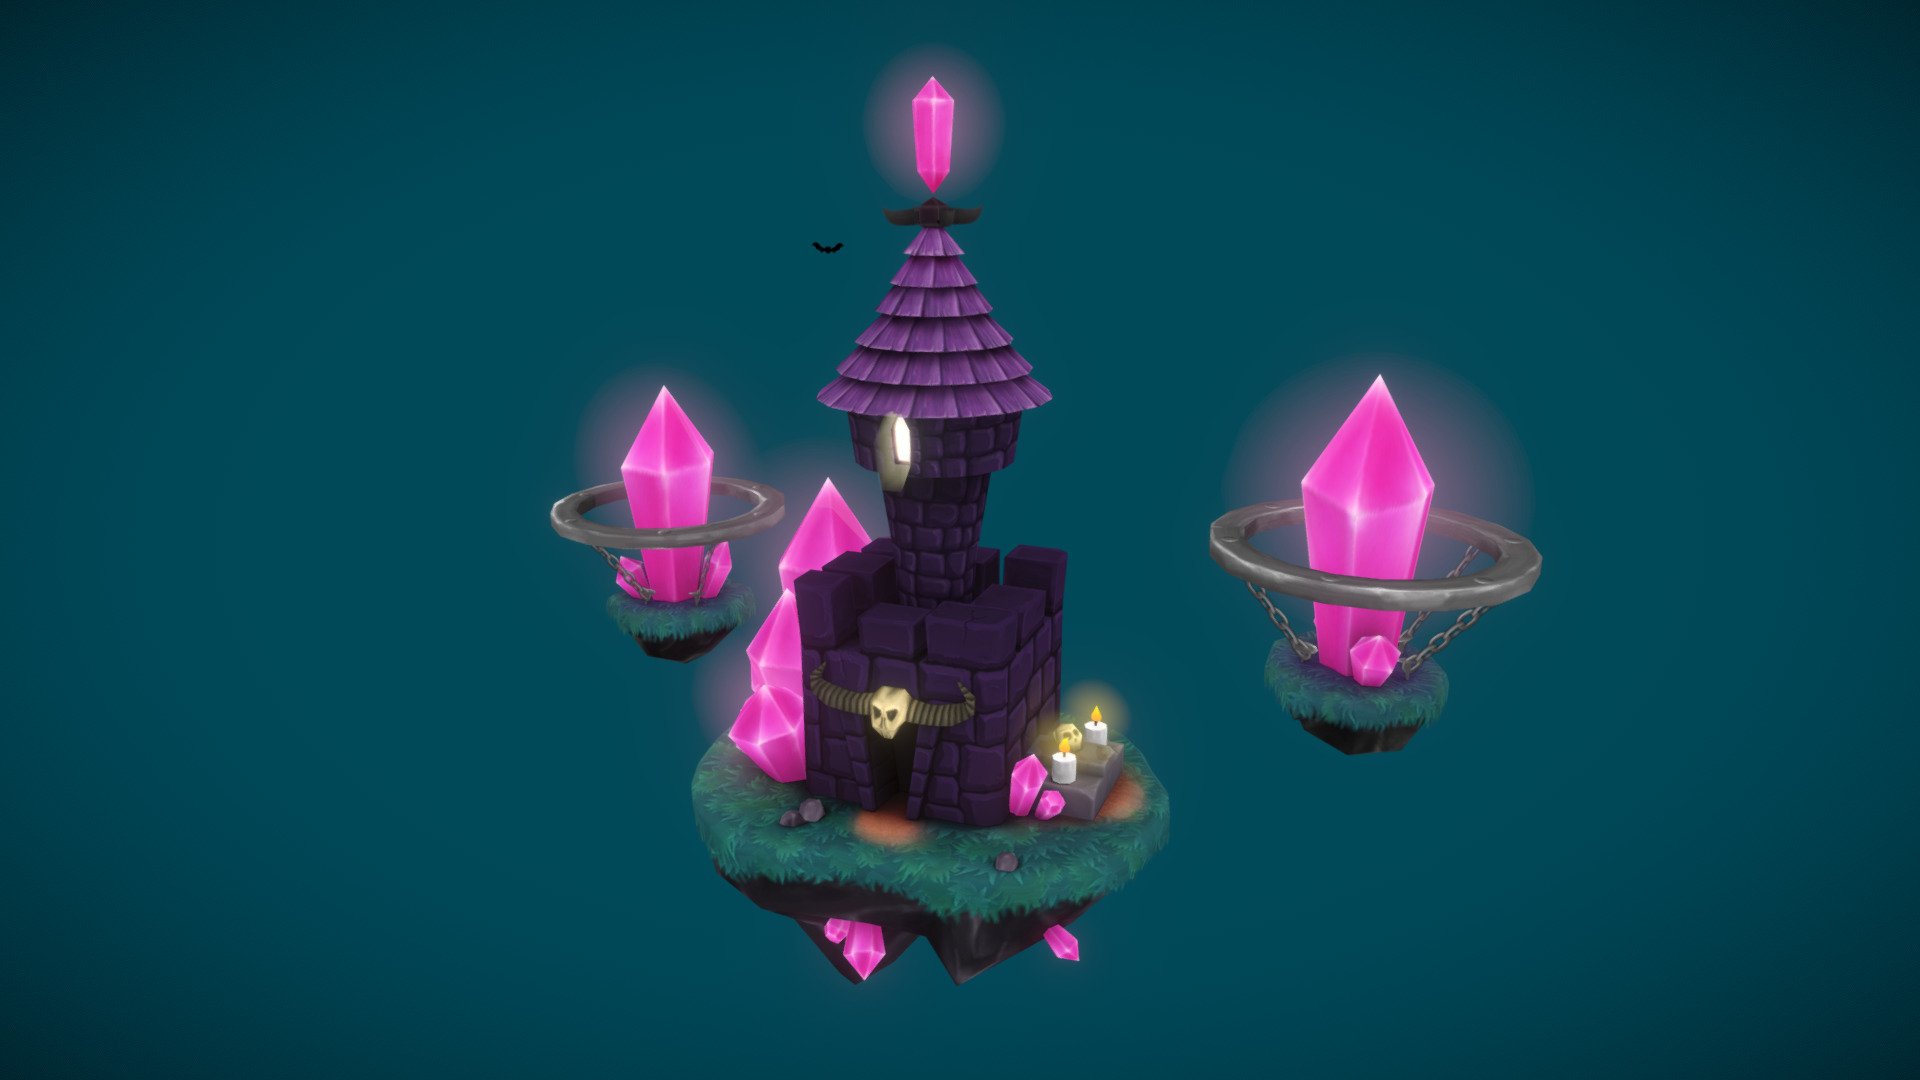 A crystal-powered floating castle. There be demons inside. Pink demons.
I was aiming for a Warcraft look (as in Frozen Throne, not necessarily WoW) with limited resolution hand painted textures.

Glow FX were originally done as billboard planes, flickering was achieved by randomly rescaling them; the little bat and moving candle flames were animated by shifting UV - as these techniques are currently unavailable on Sketchfab I edited them out and left a static model with no billboard tracking. As a countermeasure, to make it look better when rotated, I added a tiny tad of postprocessed bloom 3d model